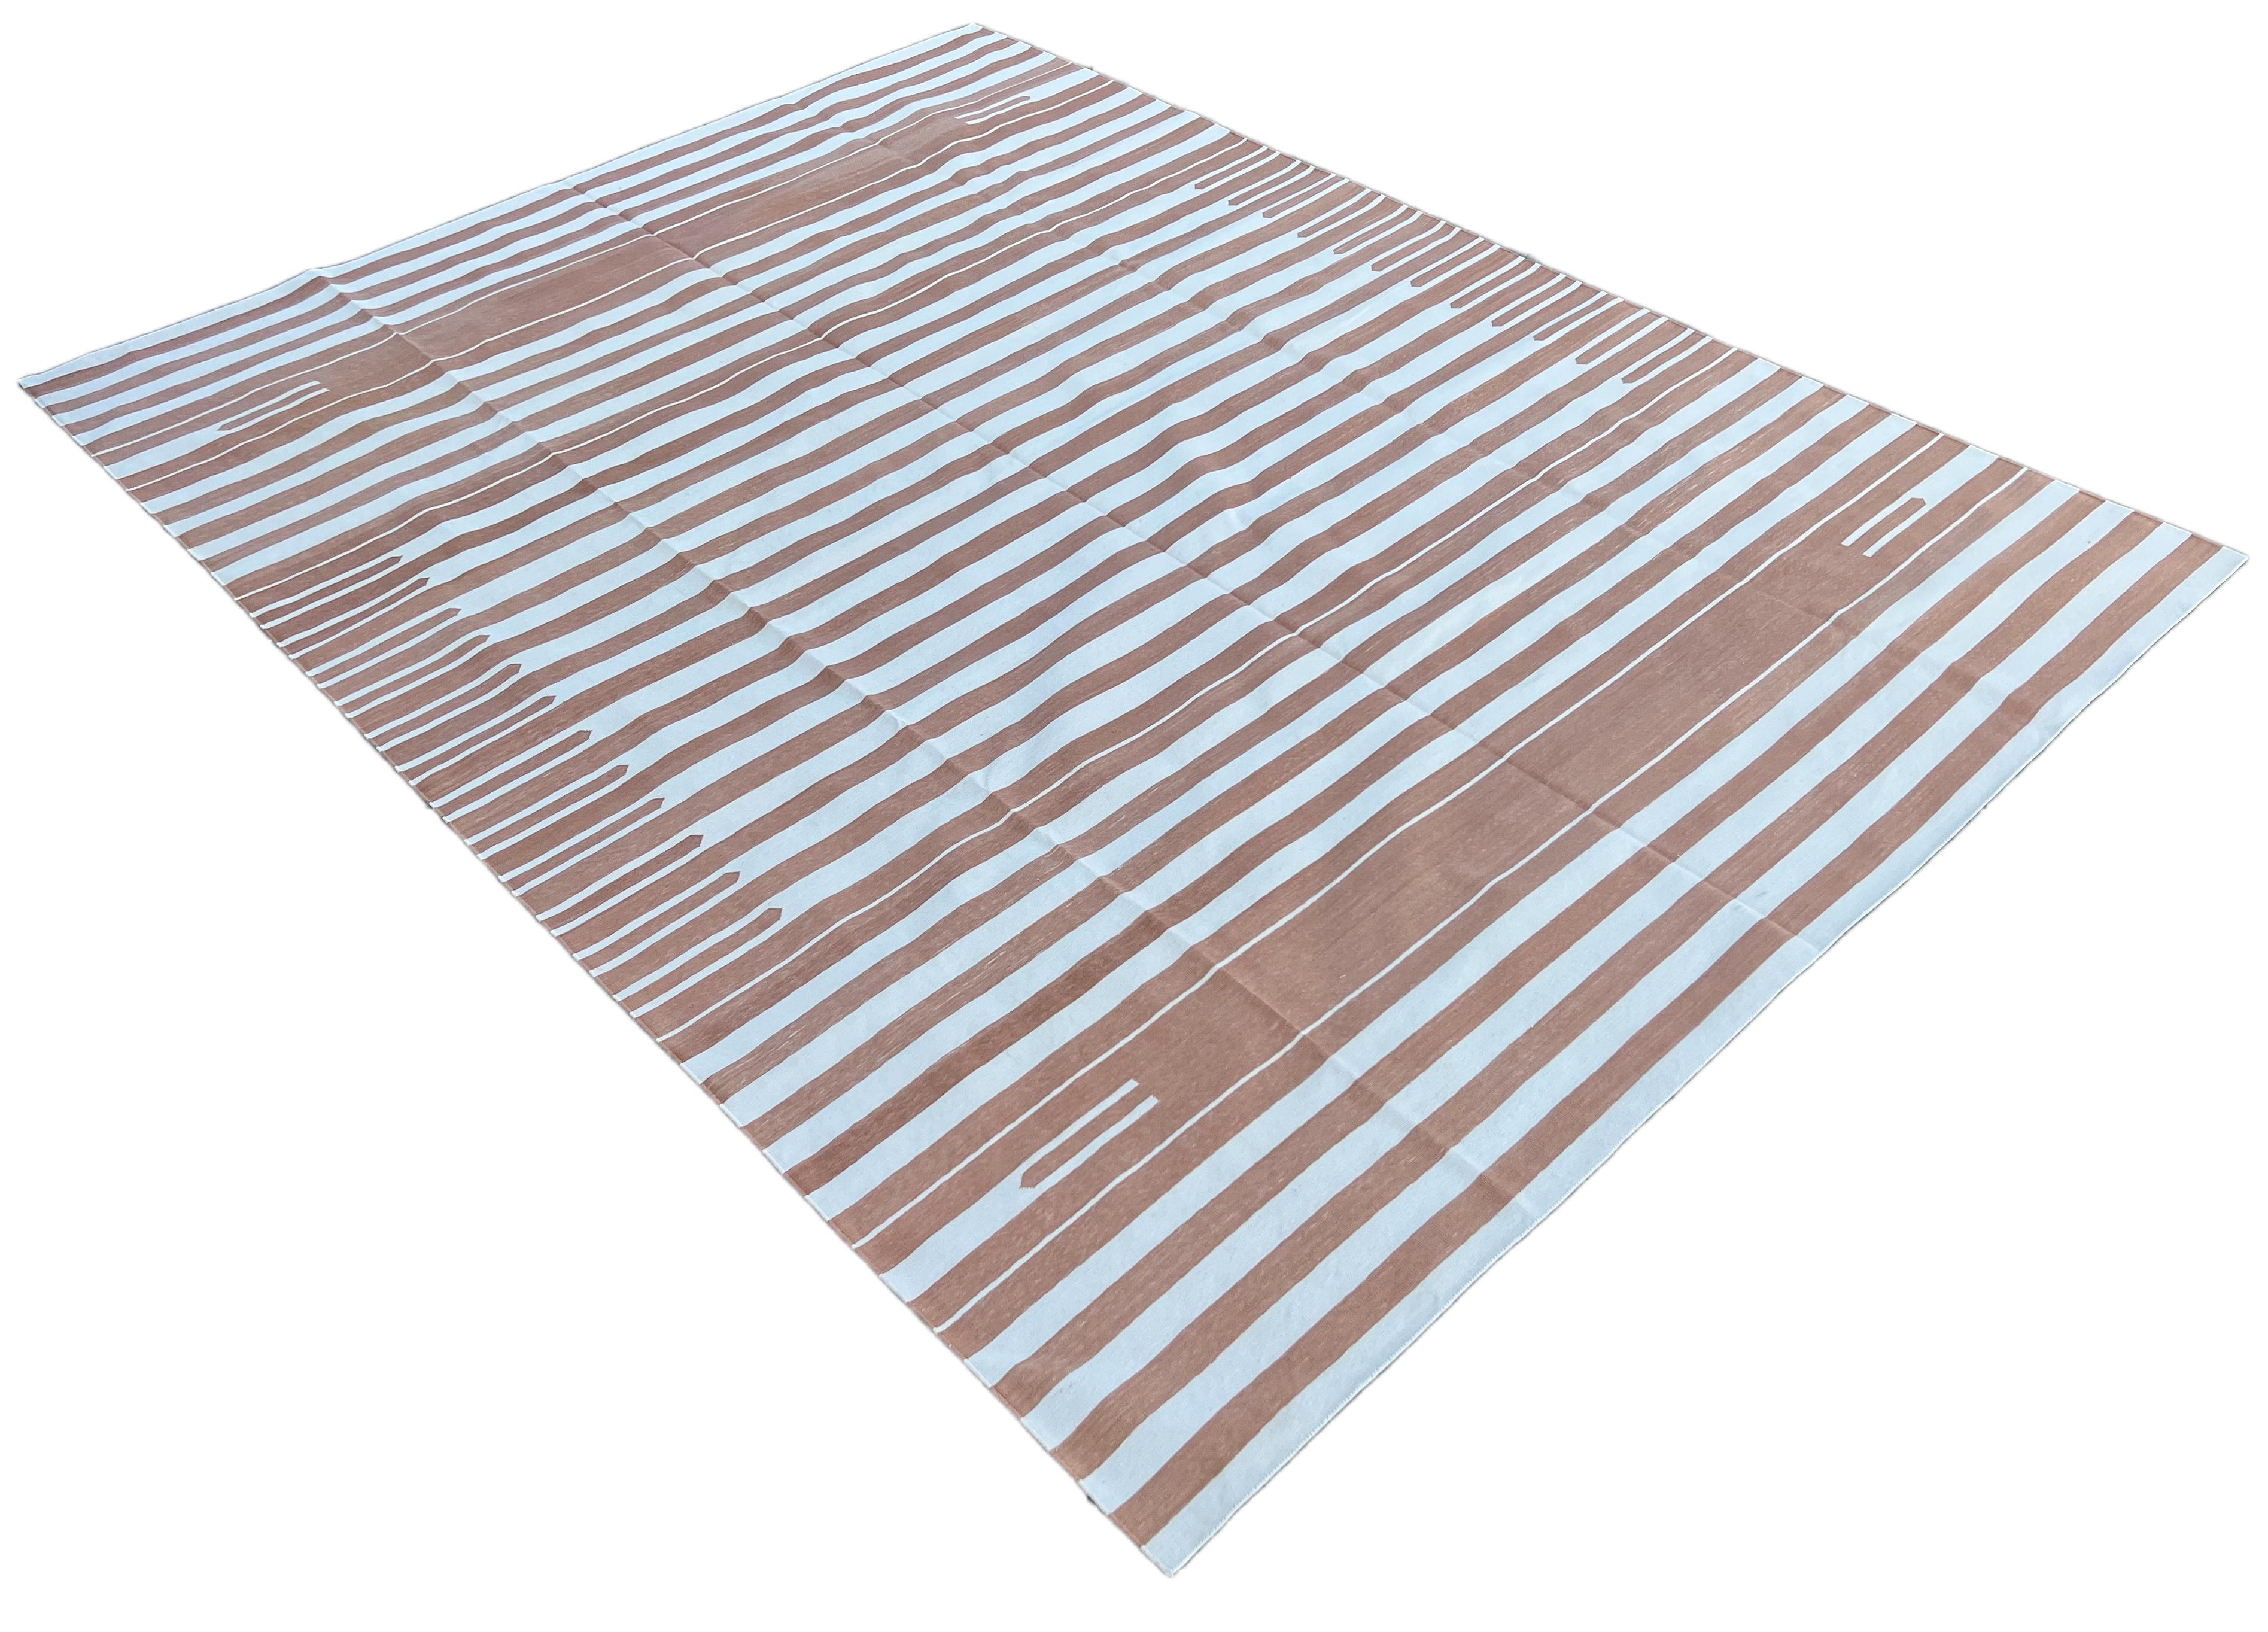 Cotton Vegetable Dyed Tan And White Up Down Striped Indian Dhurrie Rug-9'x12' 
These special flat-weave dhurries are hand-woven with 15 ply 100% cotton yarn. Due to the special manufacturing techniques used to create our rugs, the size and color of